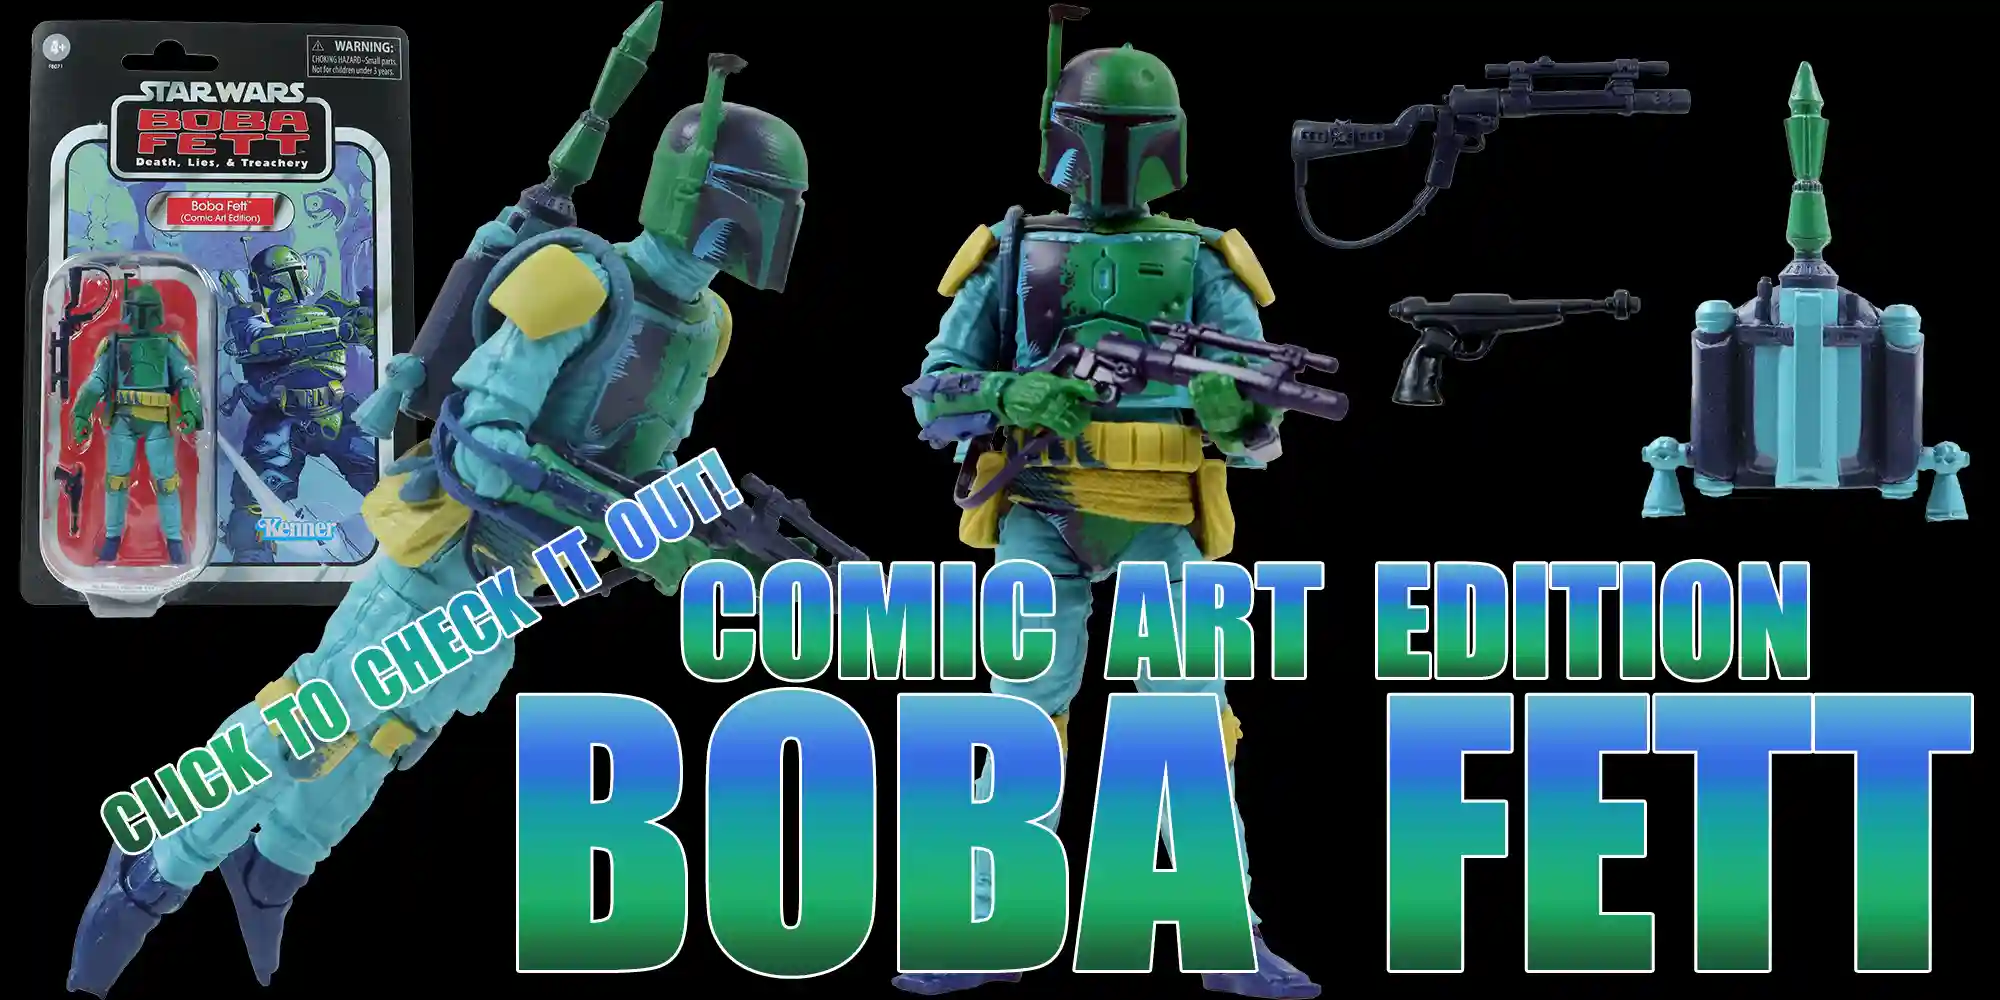 Boba Fett Comic Art Edition Added - Check It Out!